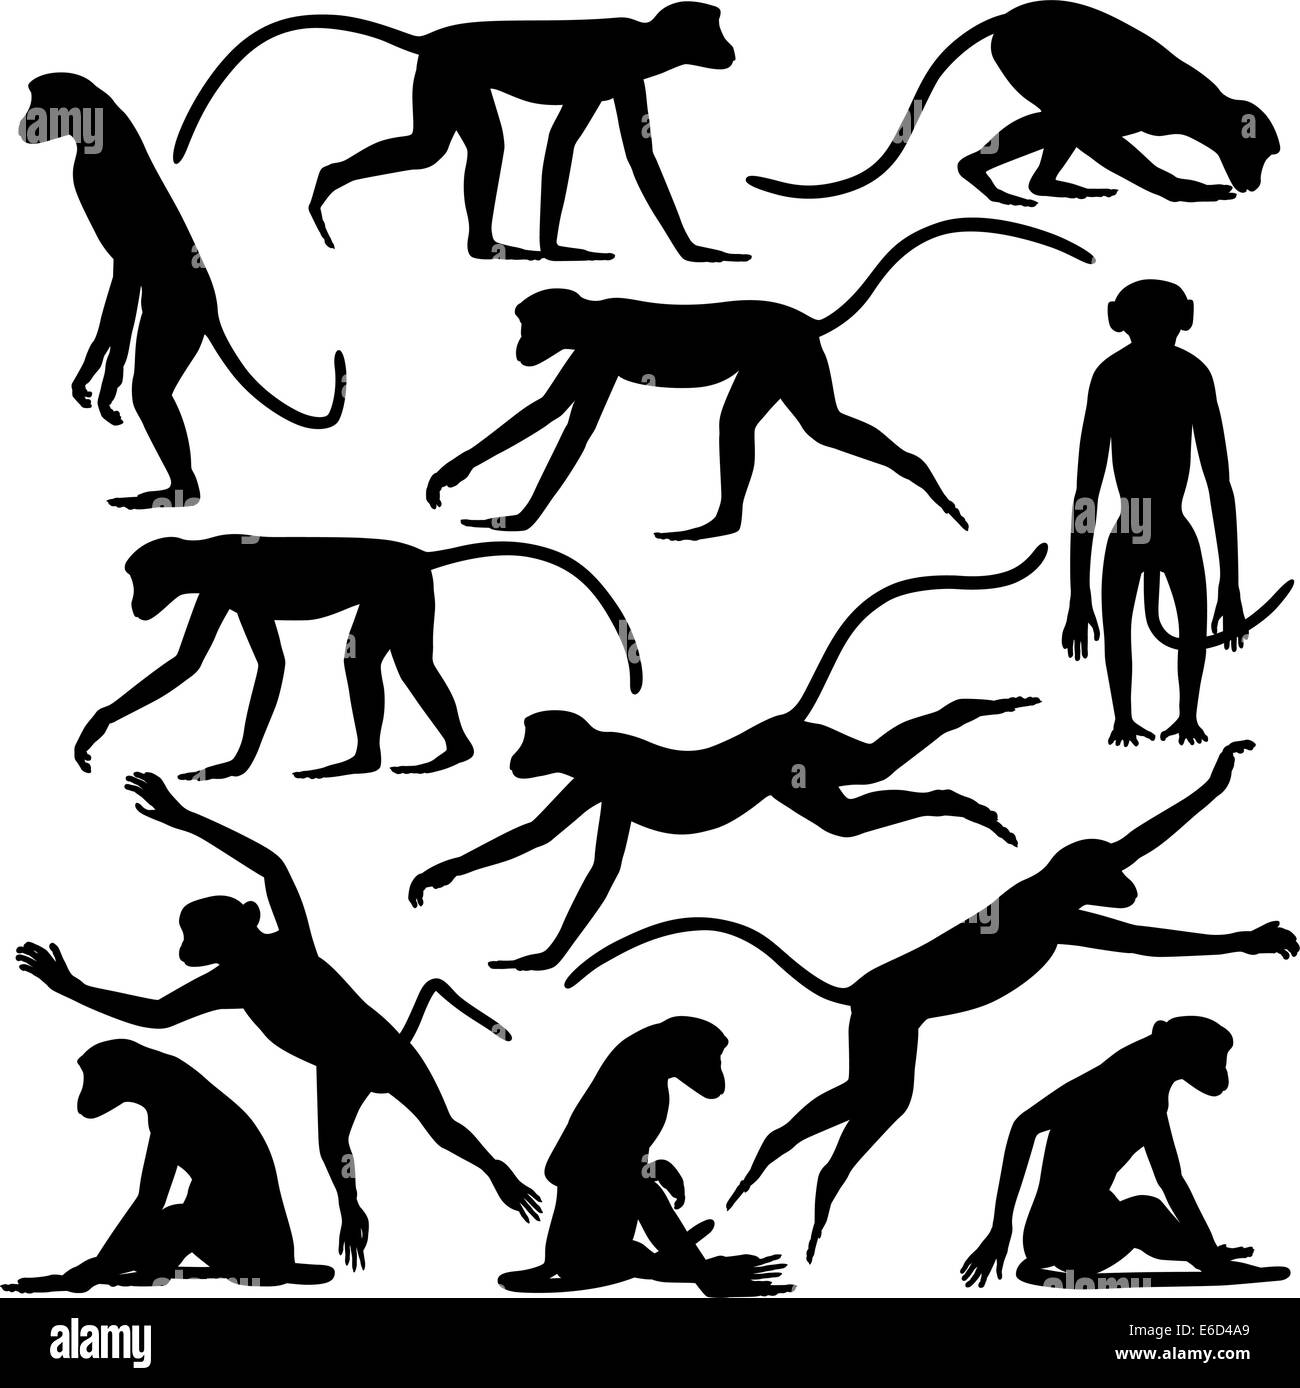 Set of editable vector silhouettes of langur monkeys in different poses Stock Vector